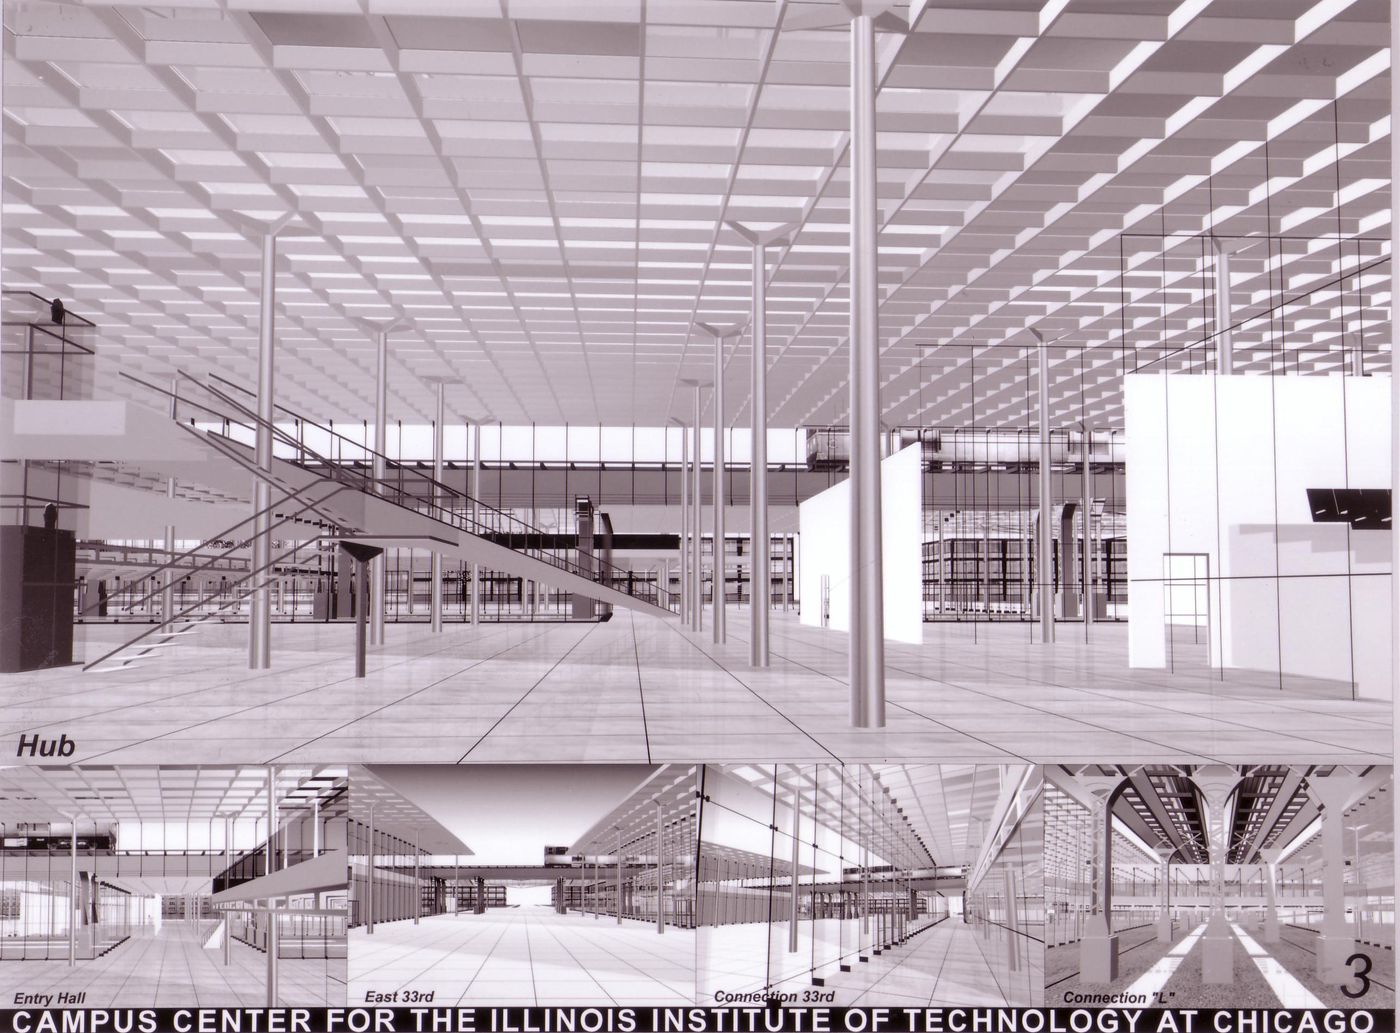 Interior and exterior perspectives, submission to the Richard H. Driehaus Foundation International Design Competition for a new campus center (1997-98), Illinois Institute of Technology, Chicago, Illinois